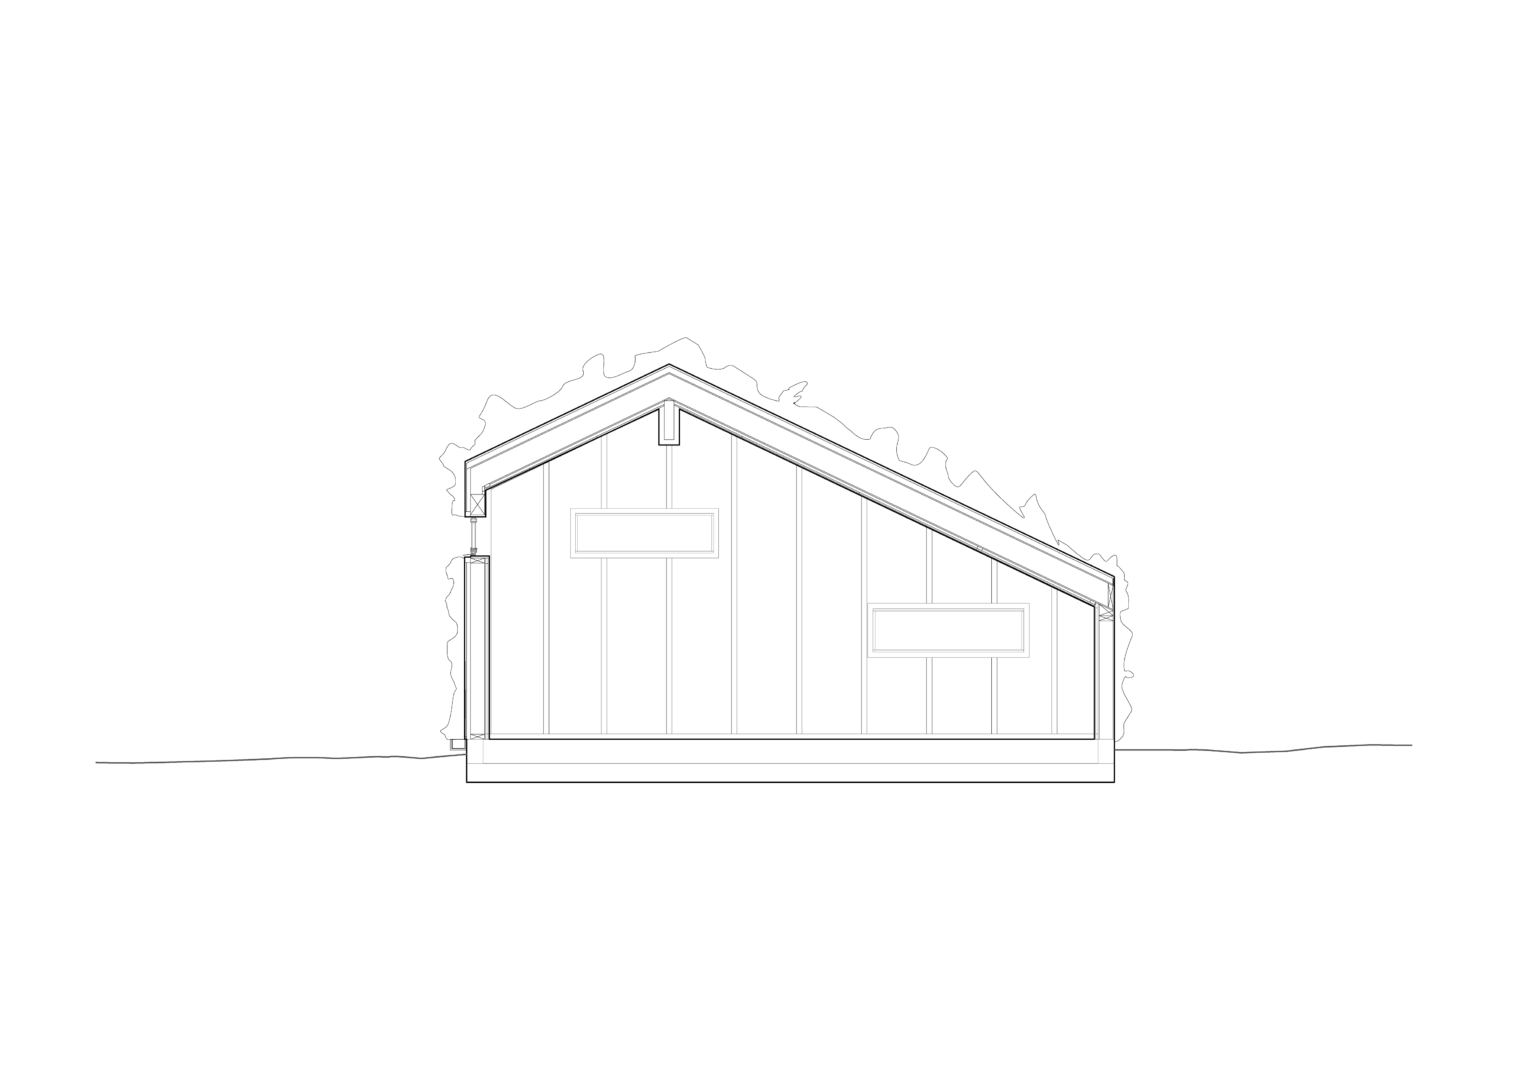 Boathouse Drawing Section 01 01